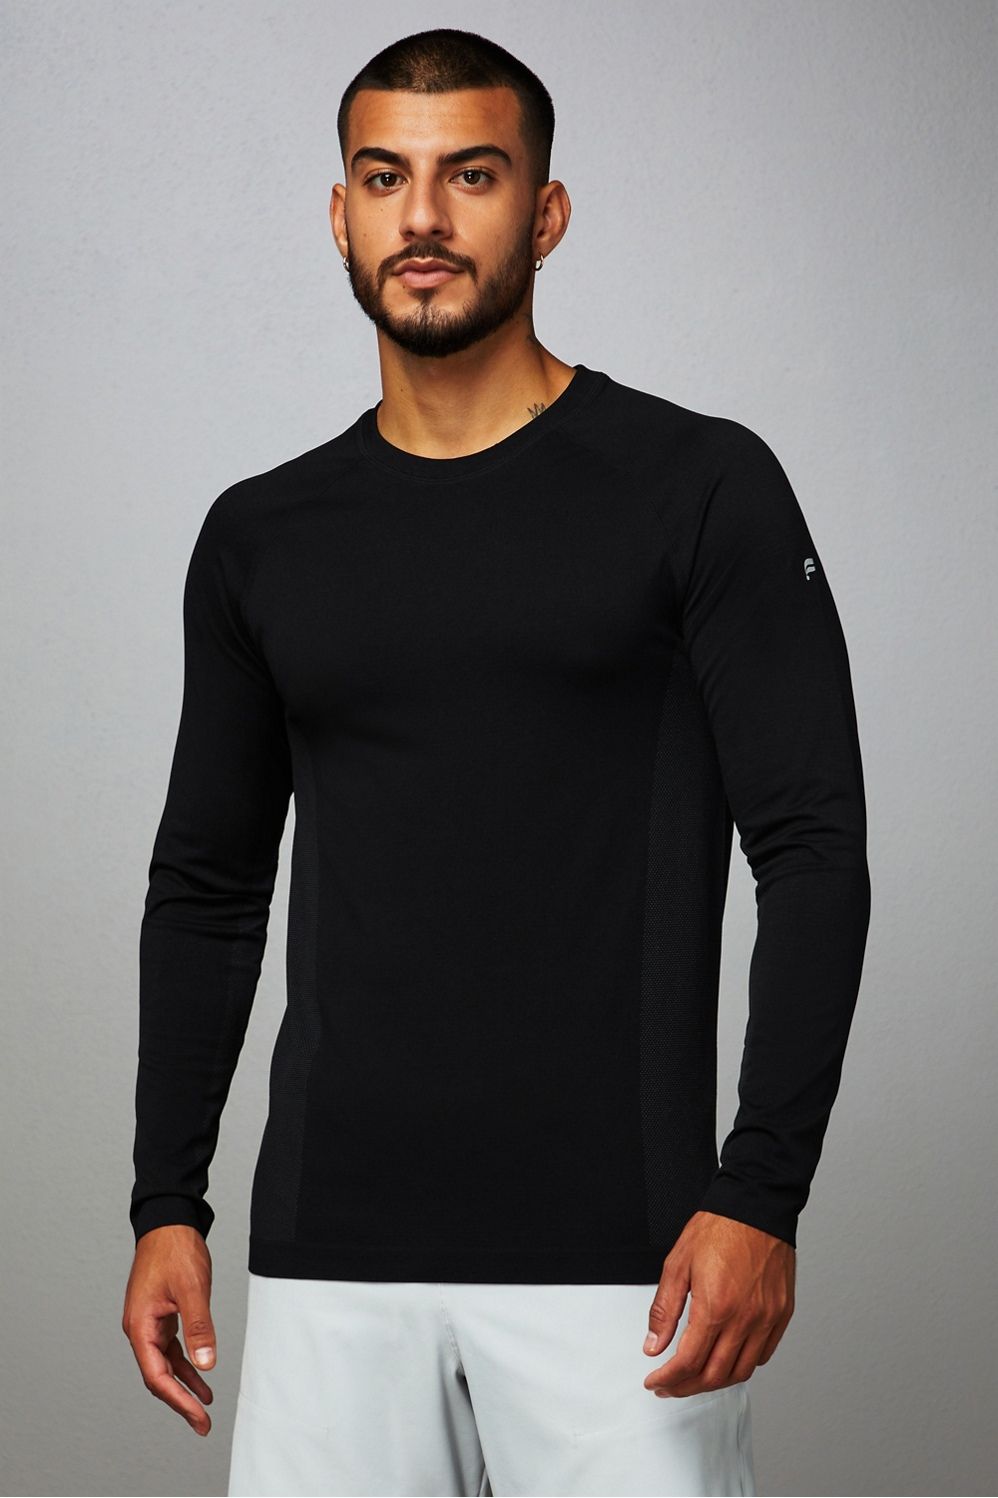 The Training Day Long Sleeve Tee | Fabletics